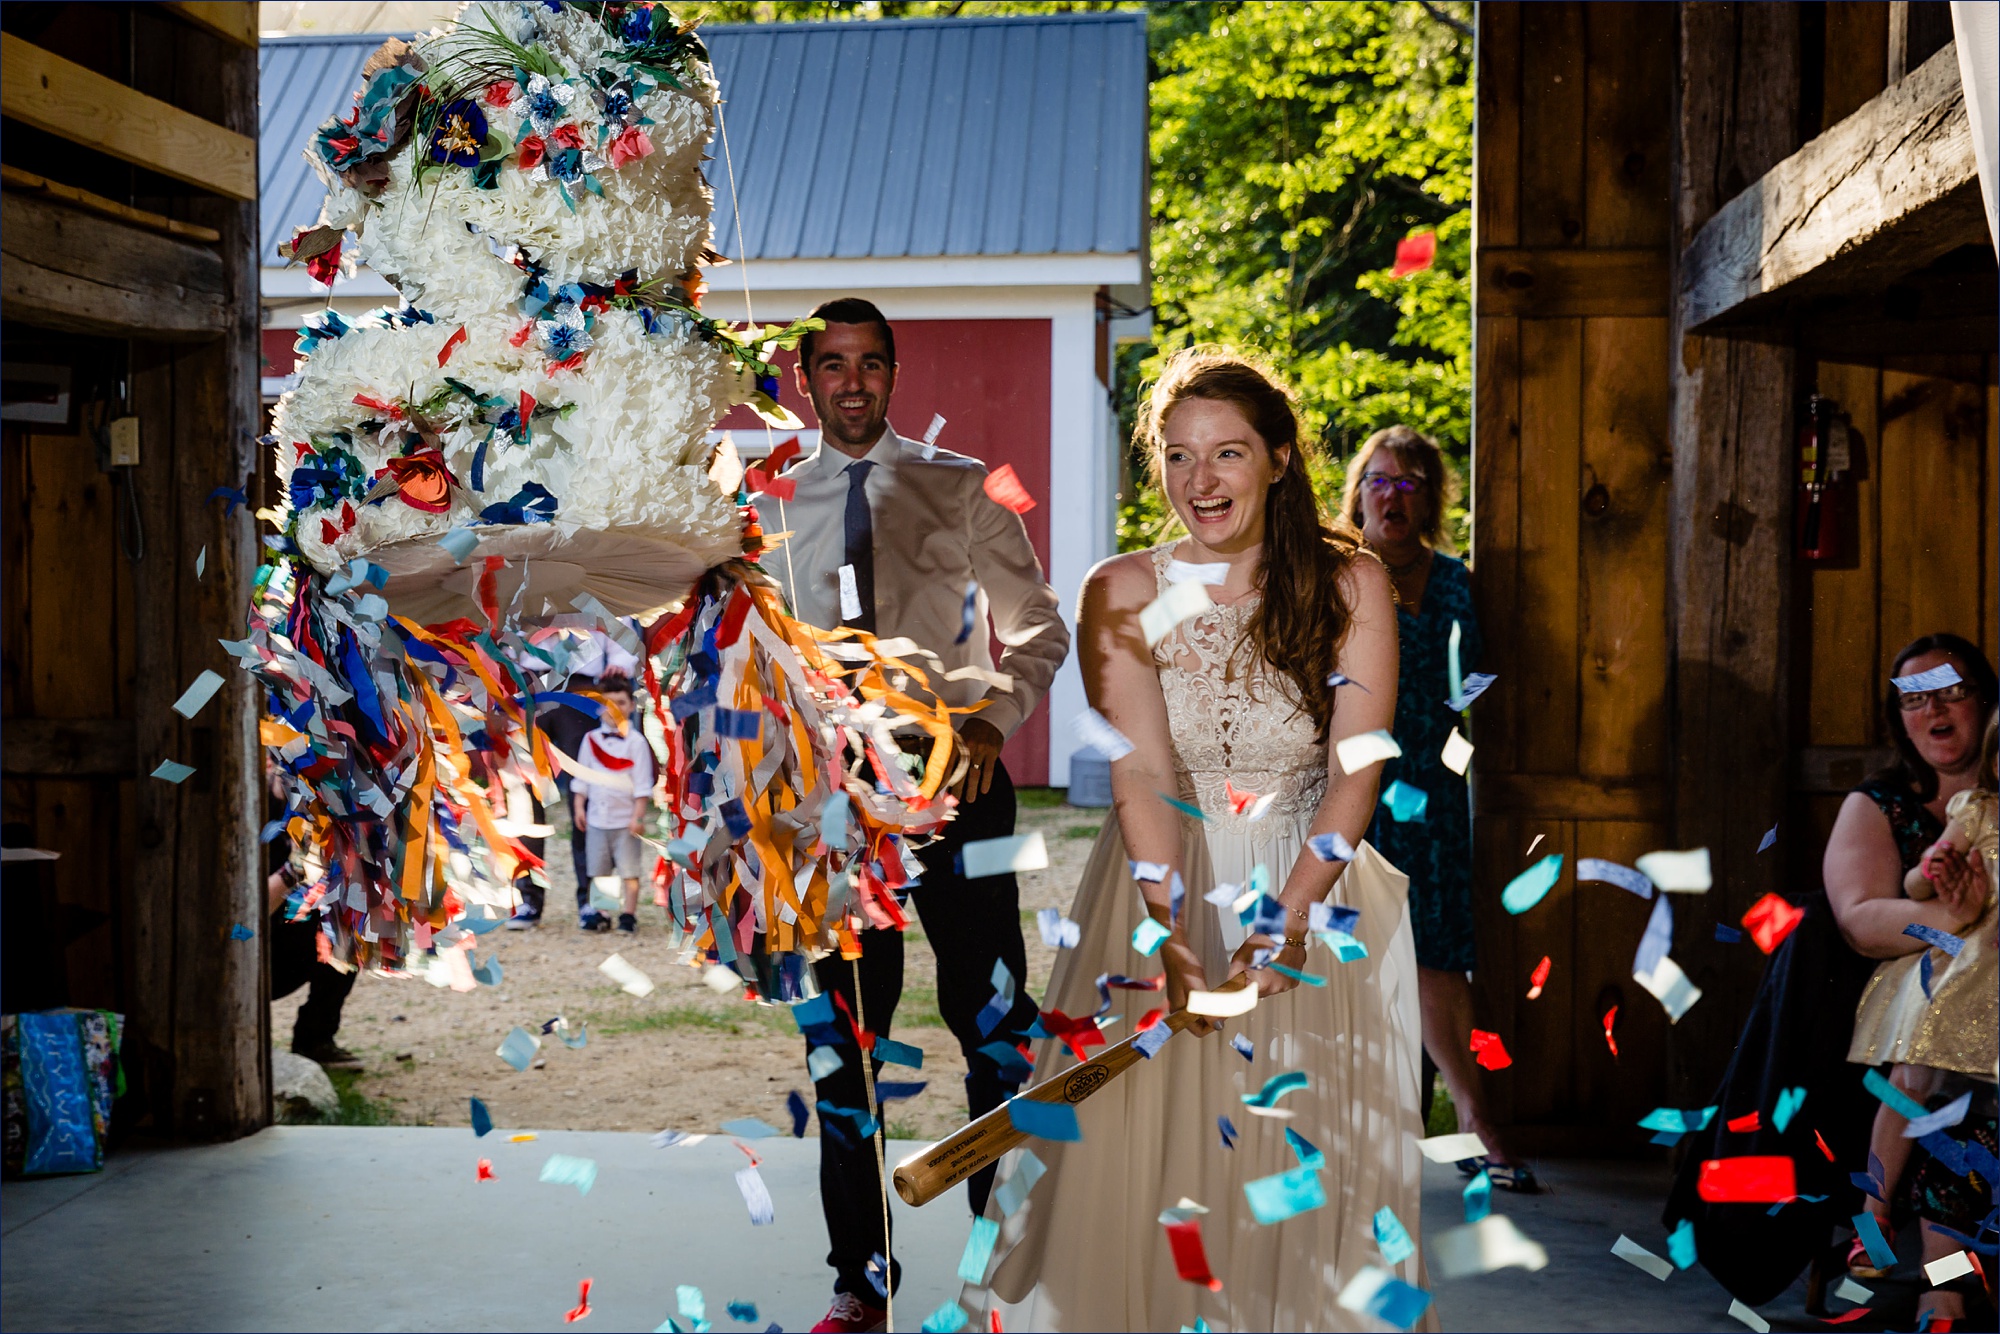 The laughs at the falling confetti from the smashed piñata shaped as a wedding cake 